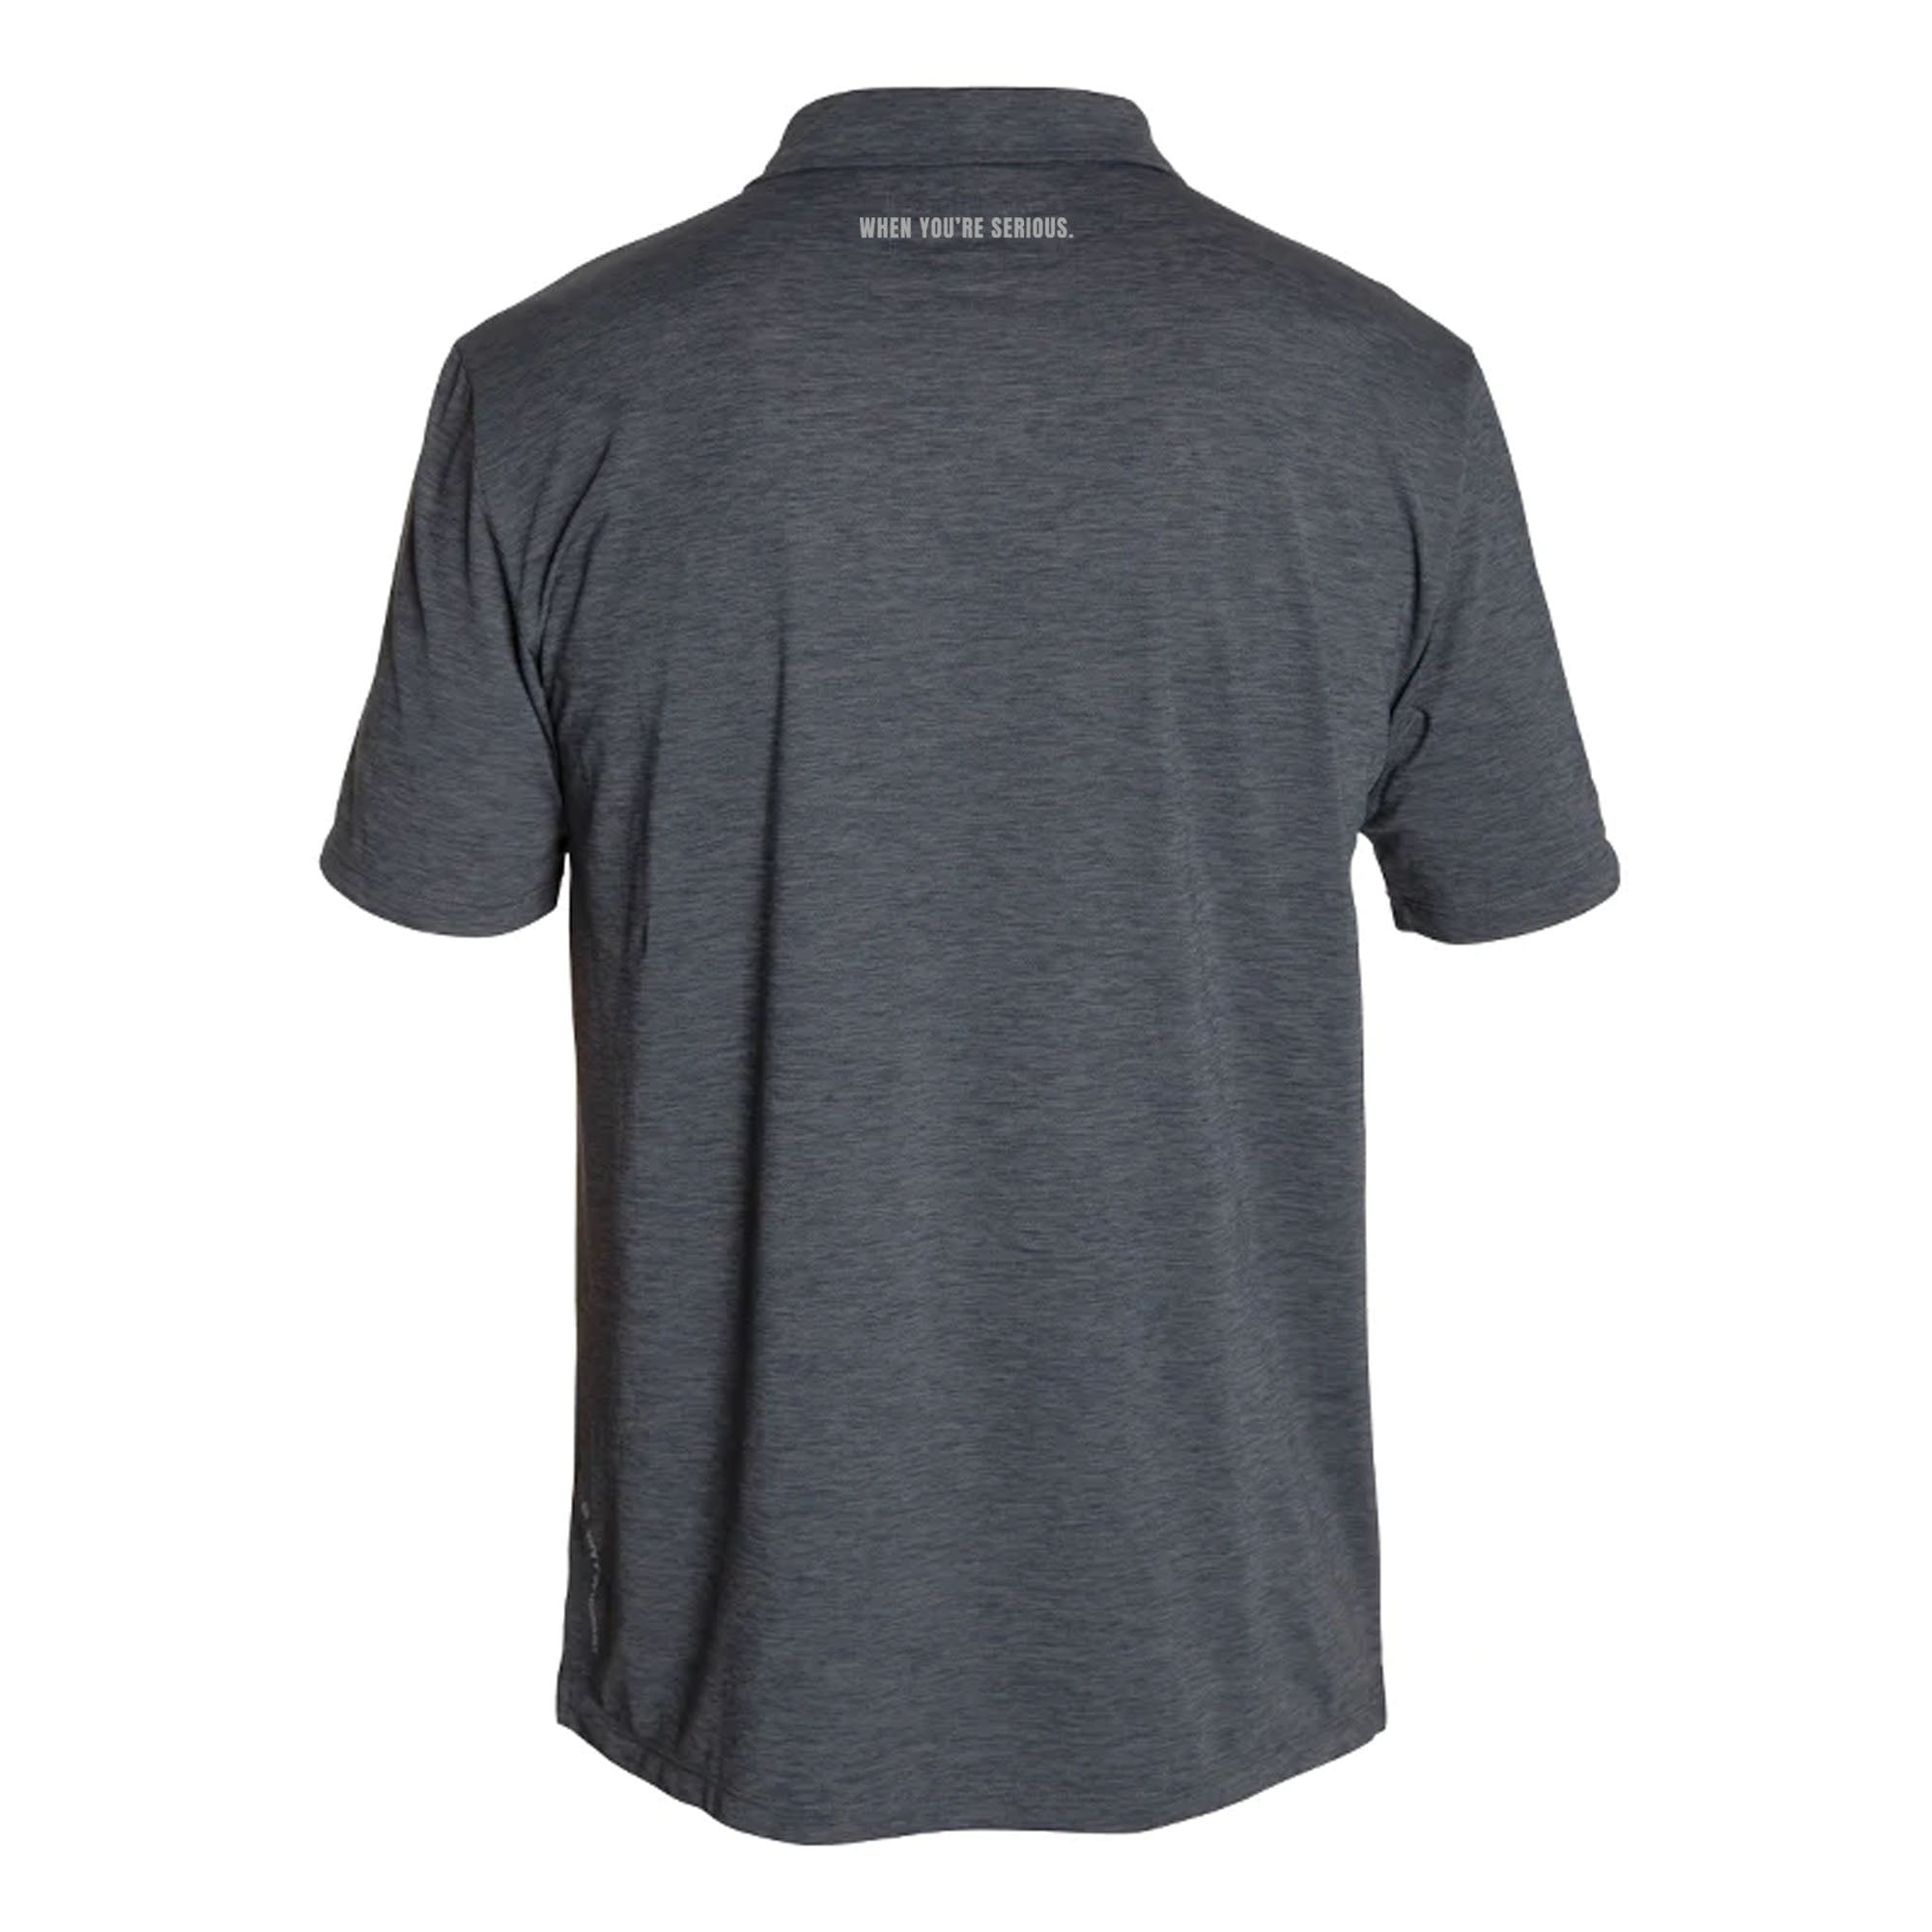 Invincible Anetik Low Pro Tech Polo S/S Charcoal Heathered